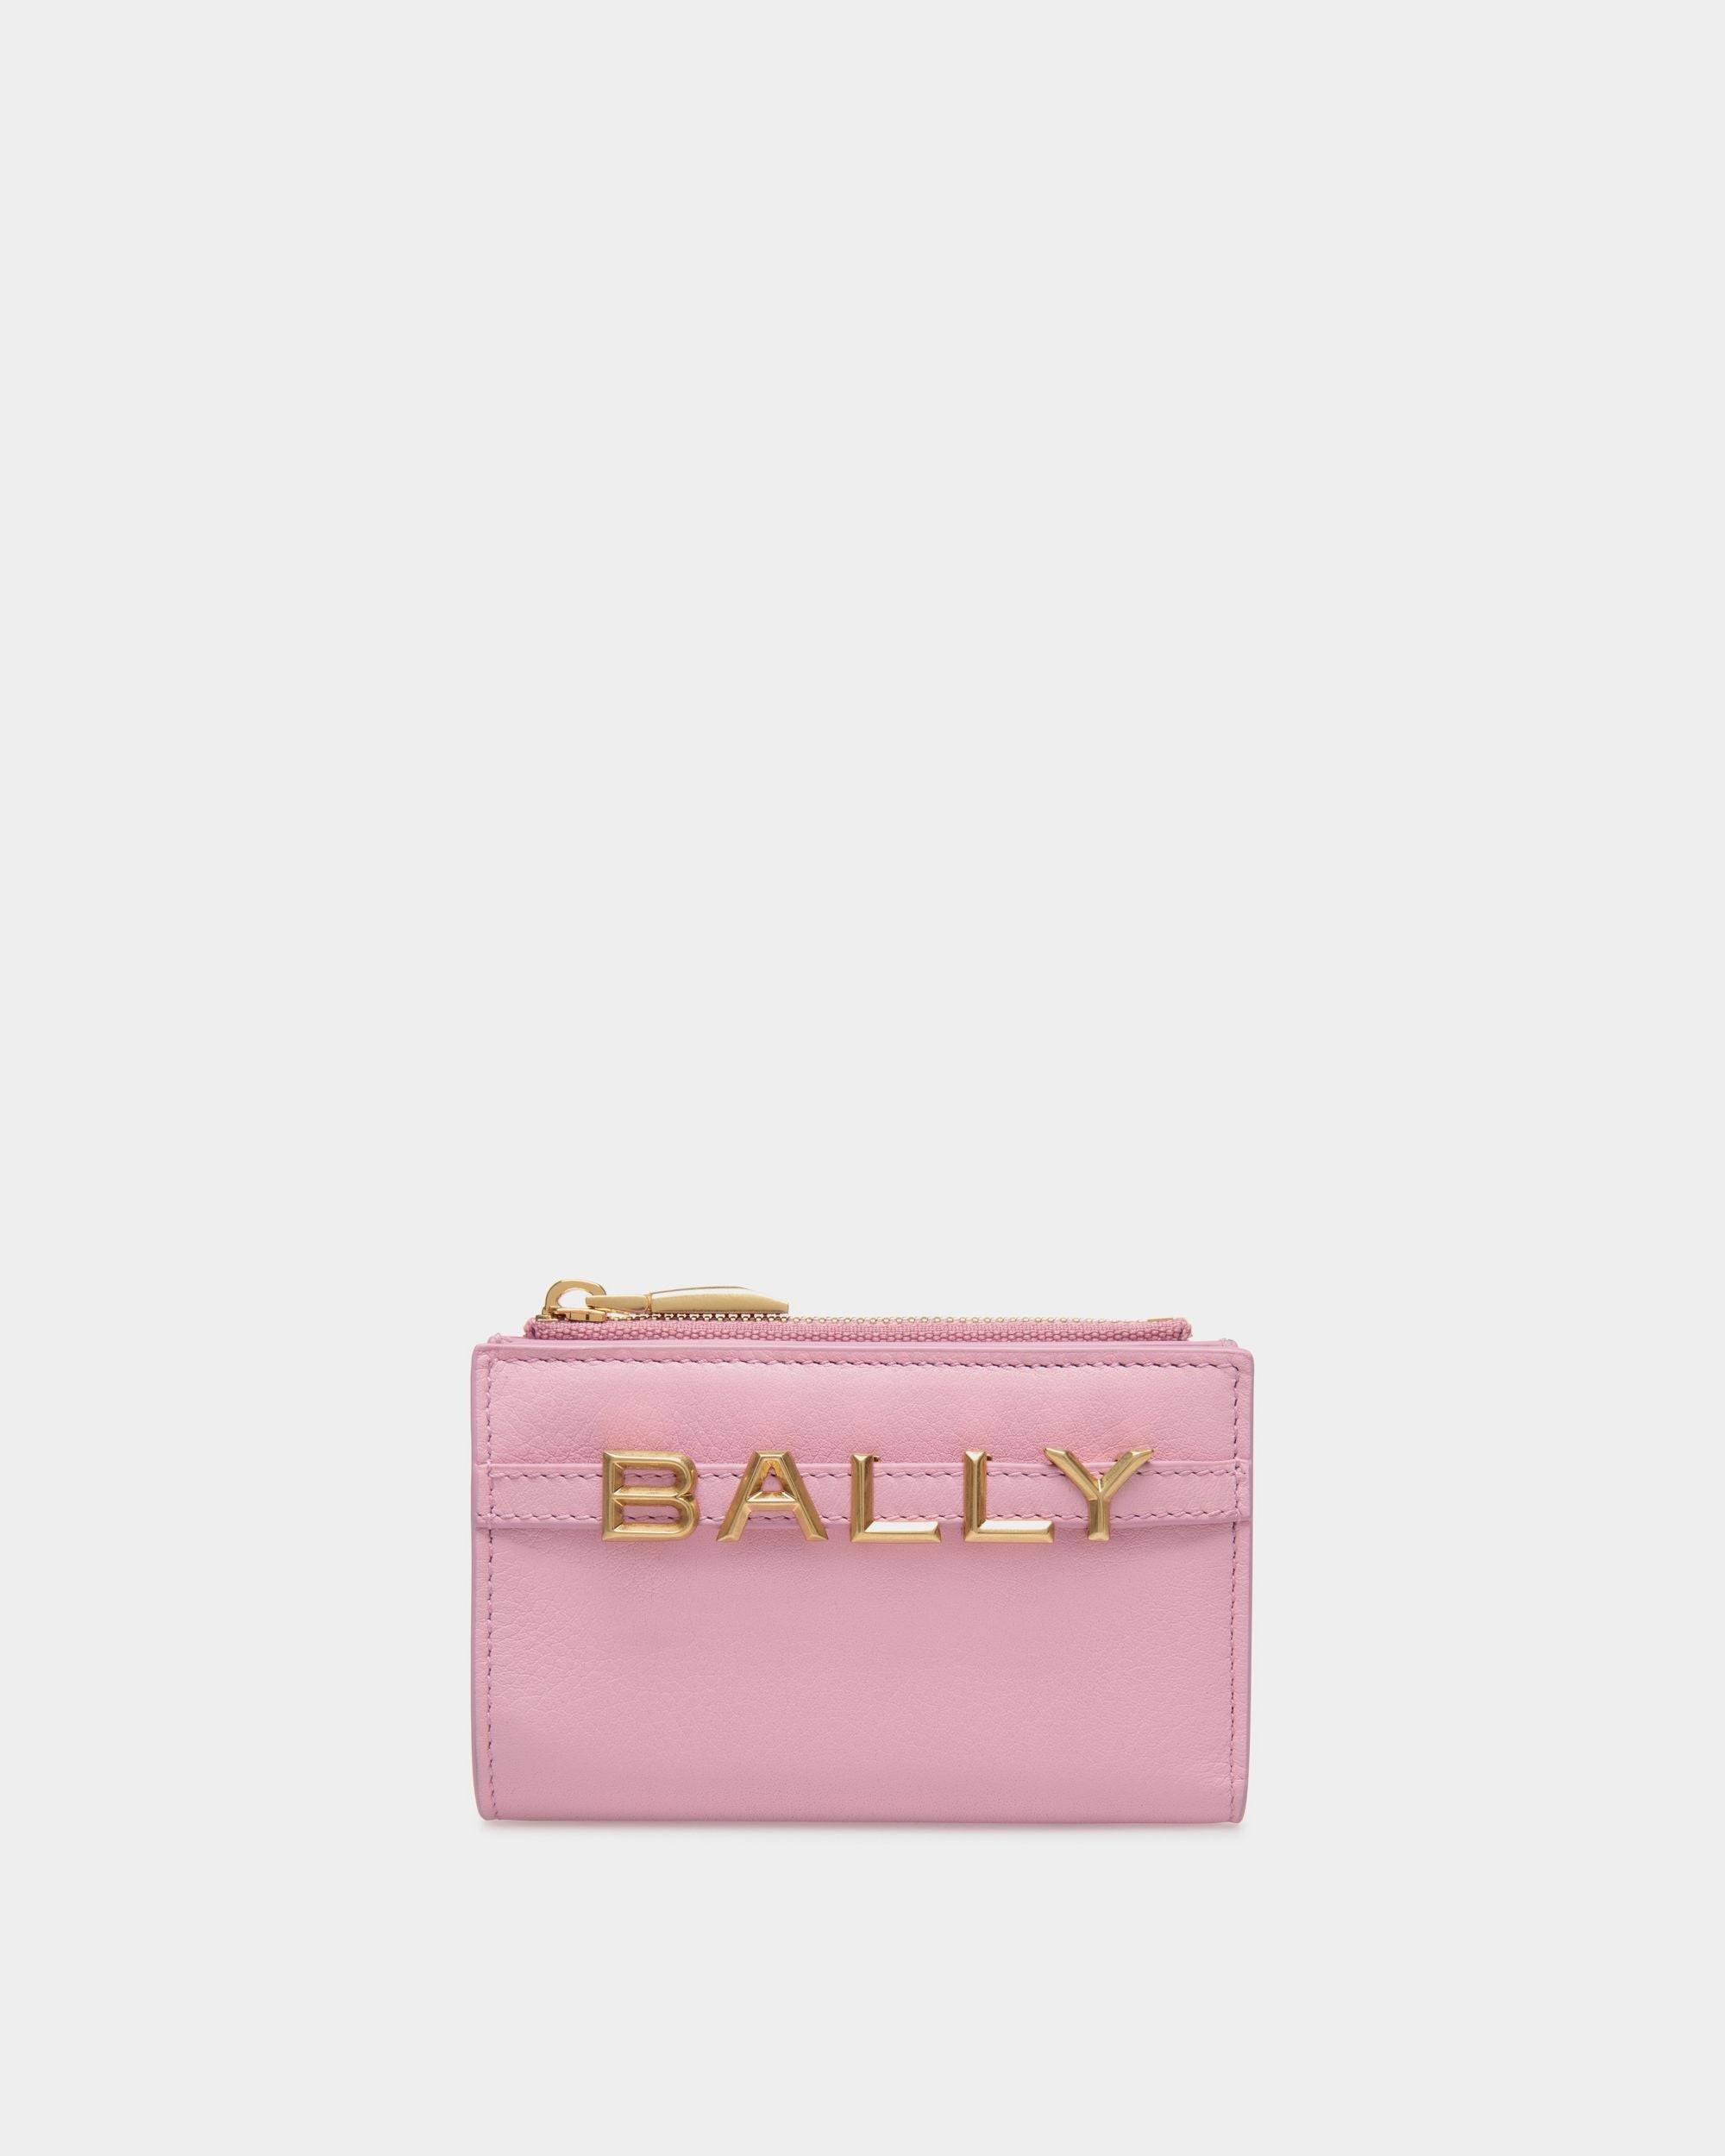 Women's Bally Spell Wallet in Pink Leather | Bally | Still Life Front